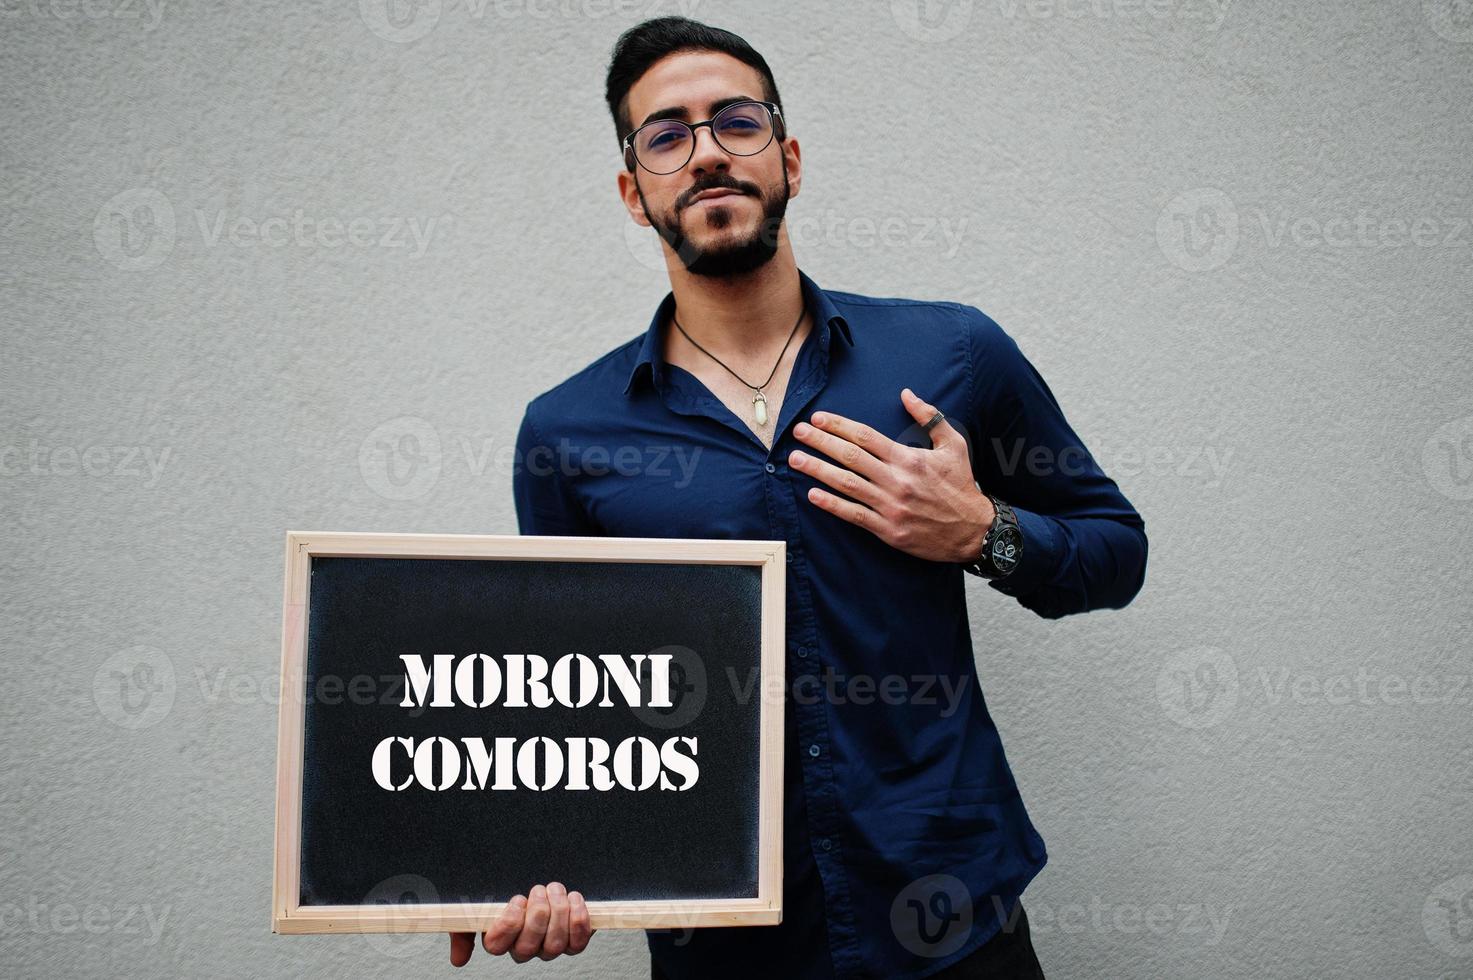 Arab man wear blue shirt and eyeglasses hold board with Moroni Comoros inscription. Largest cities in islamic world concept. photo